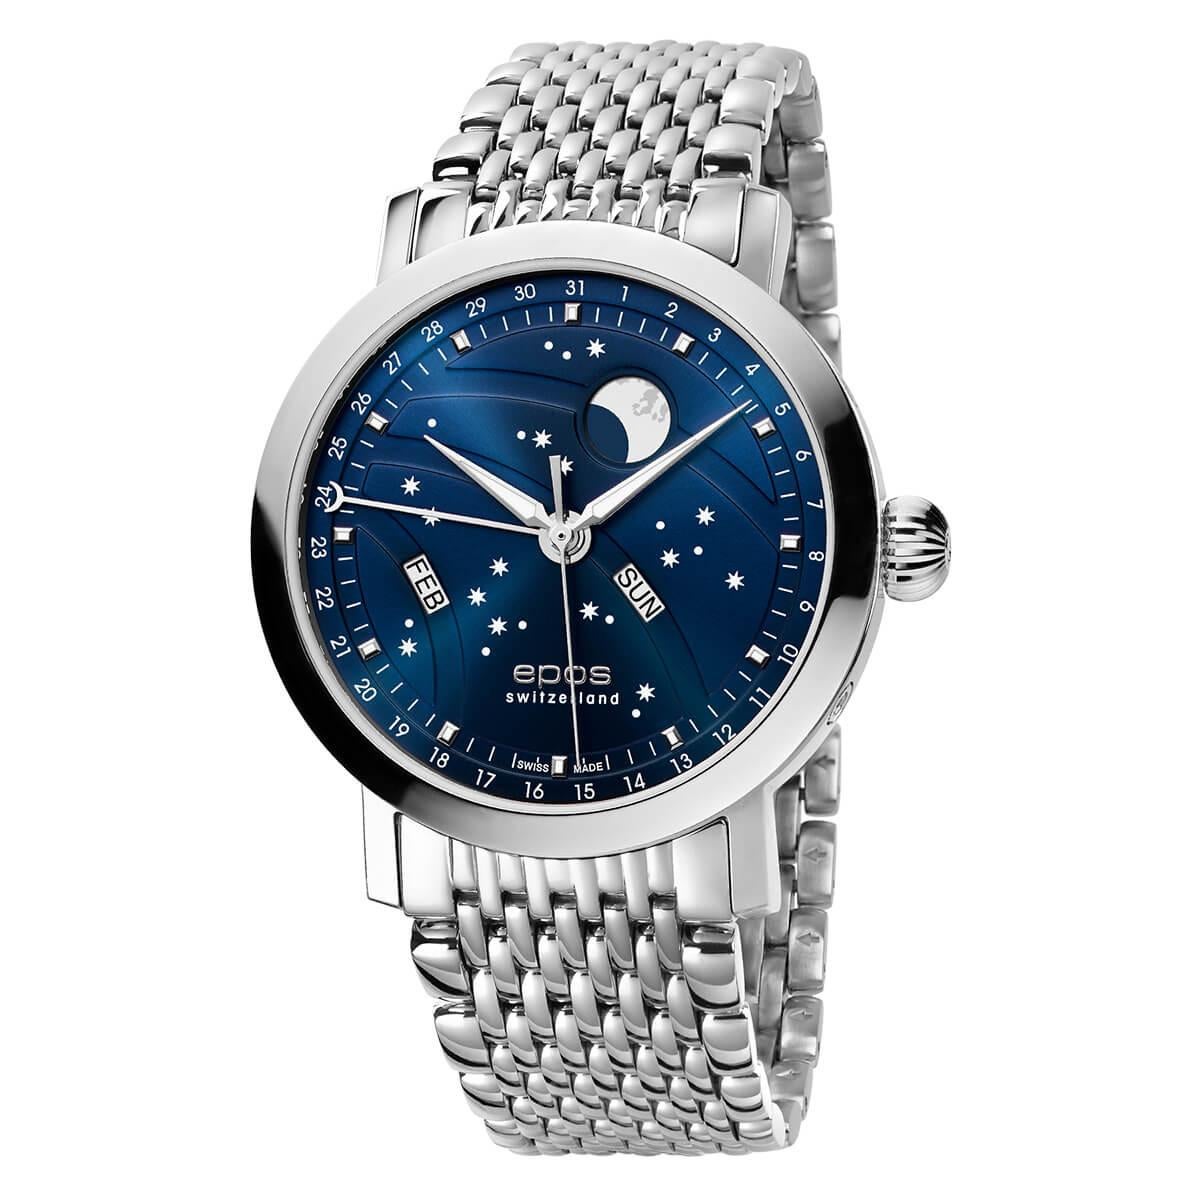 Automatic moon phase watch with in-house big moon modification with big luminescent moon and stars.
